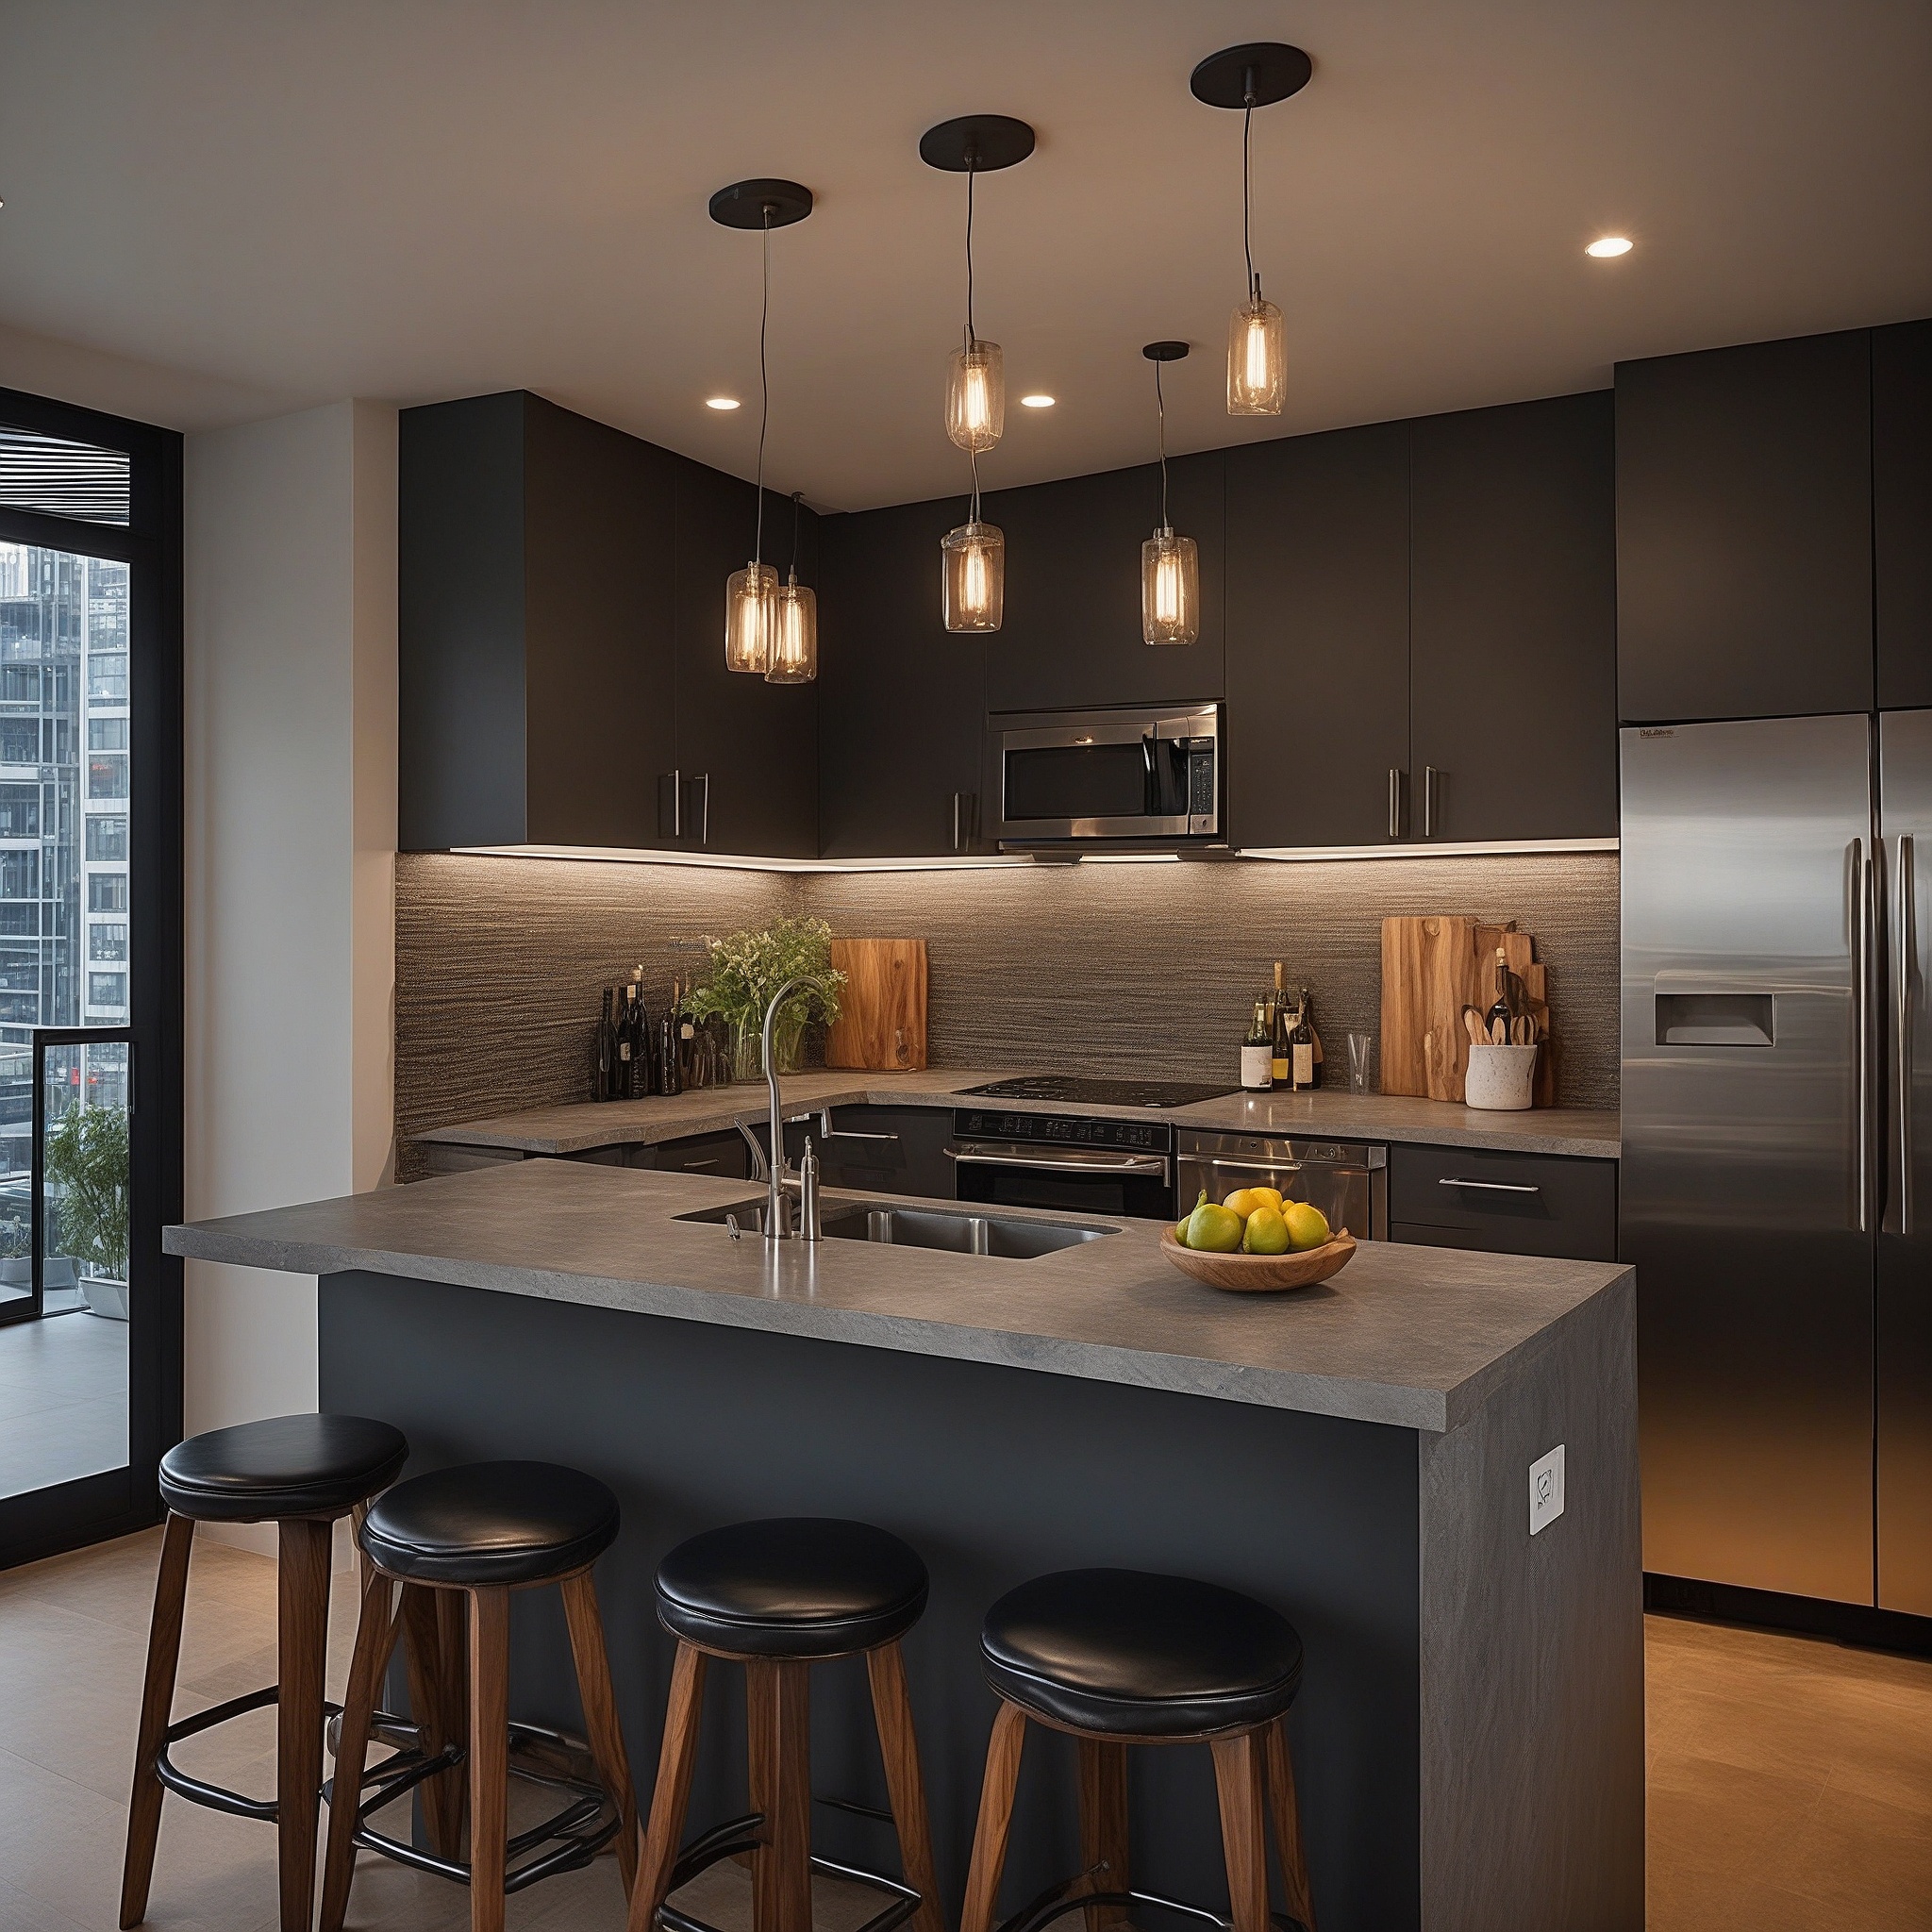 Urban Chic Apartment Kitchen Layout With Dark Cabinetry, And Small Kitchen Island